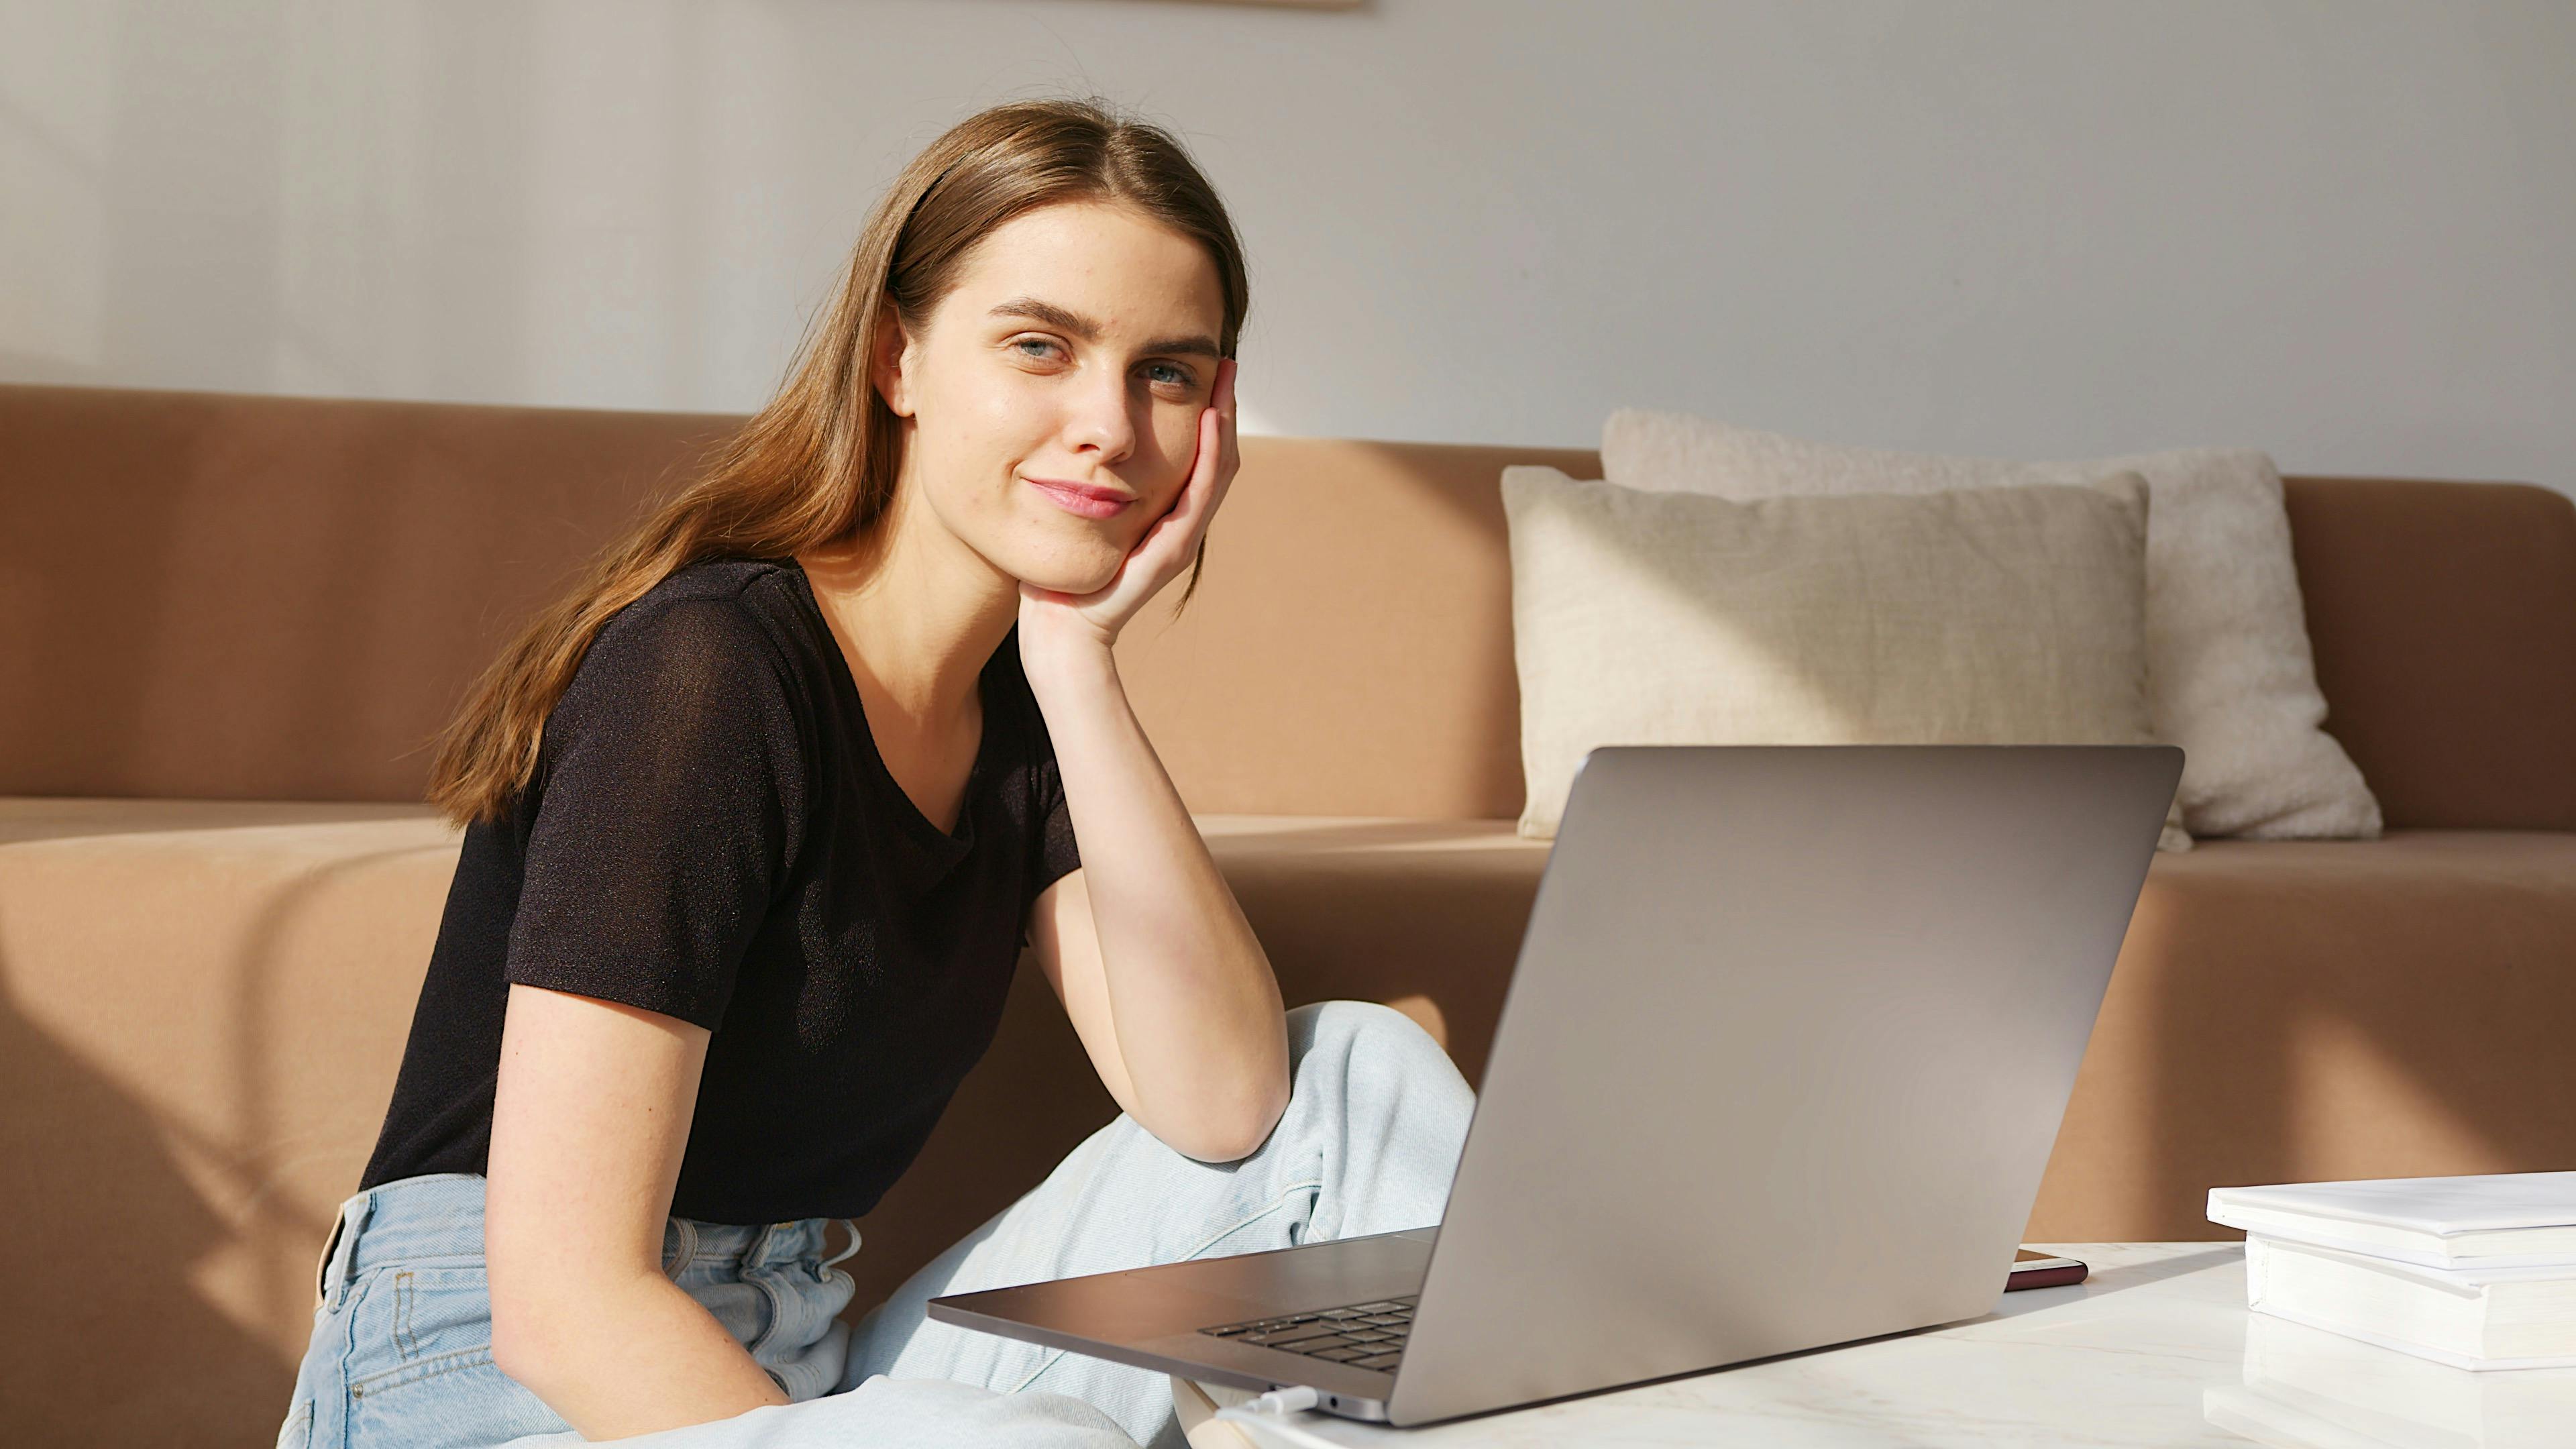 Content Young Woman Using Laptop And Leaning Head On Hand · Free Stock